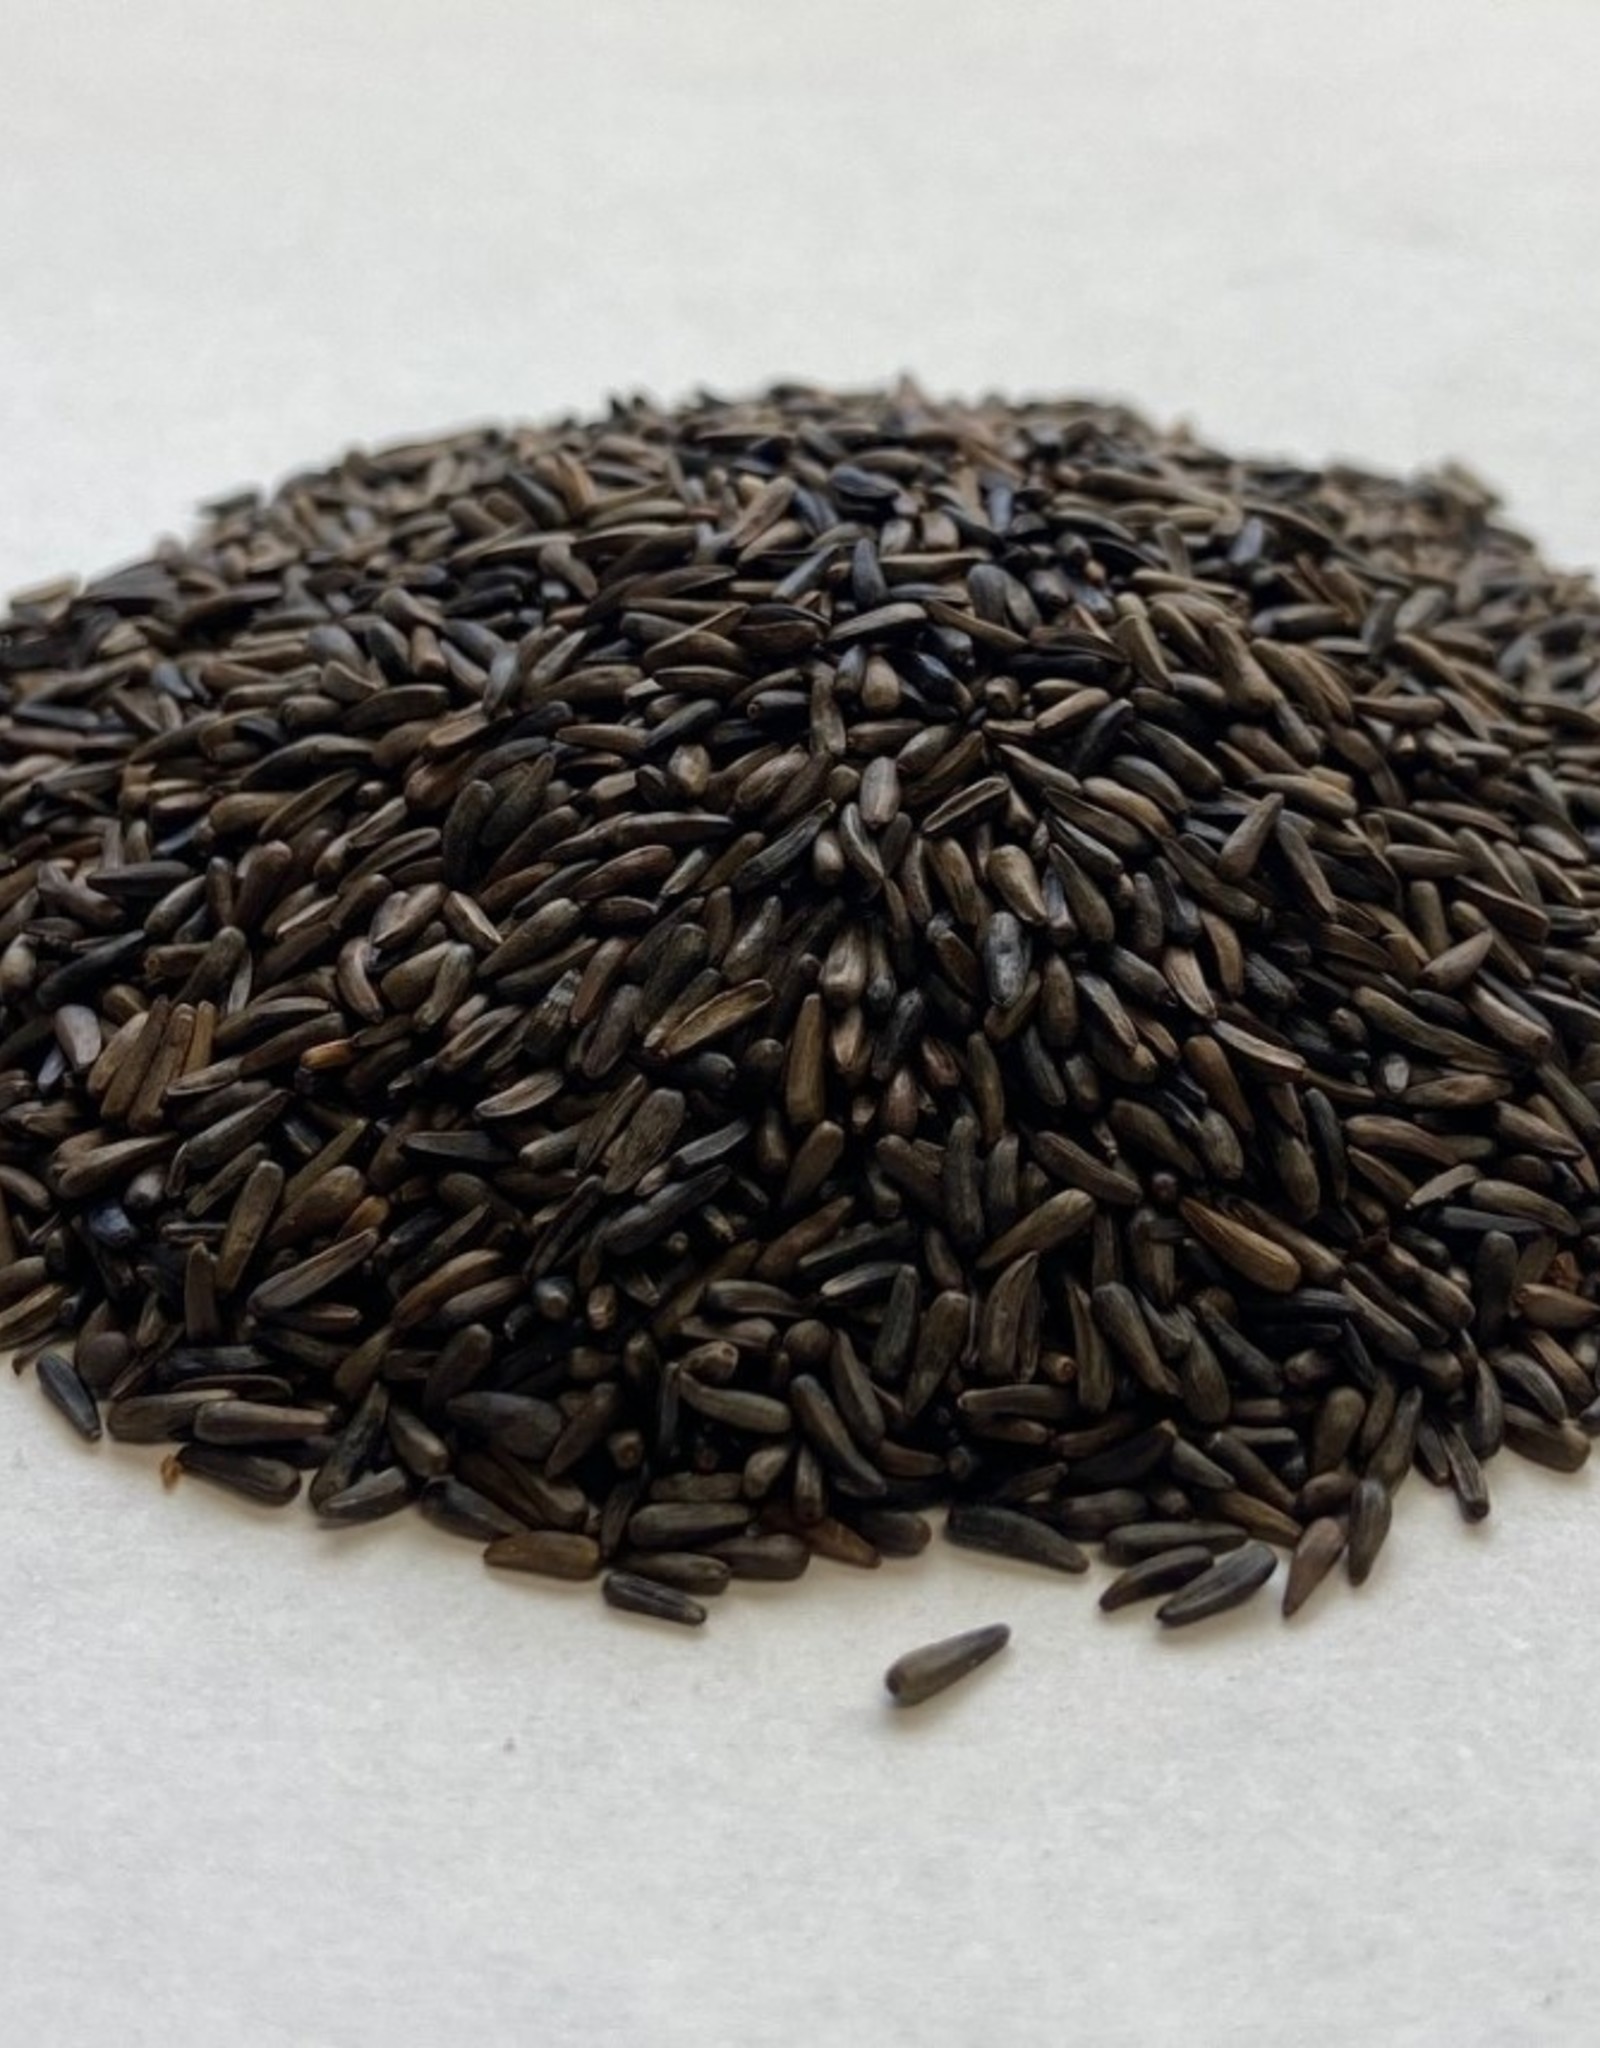 UNBRANDED NYJER SEED 5 LBS